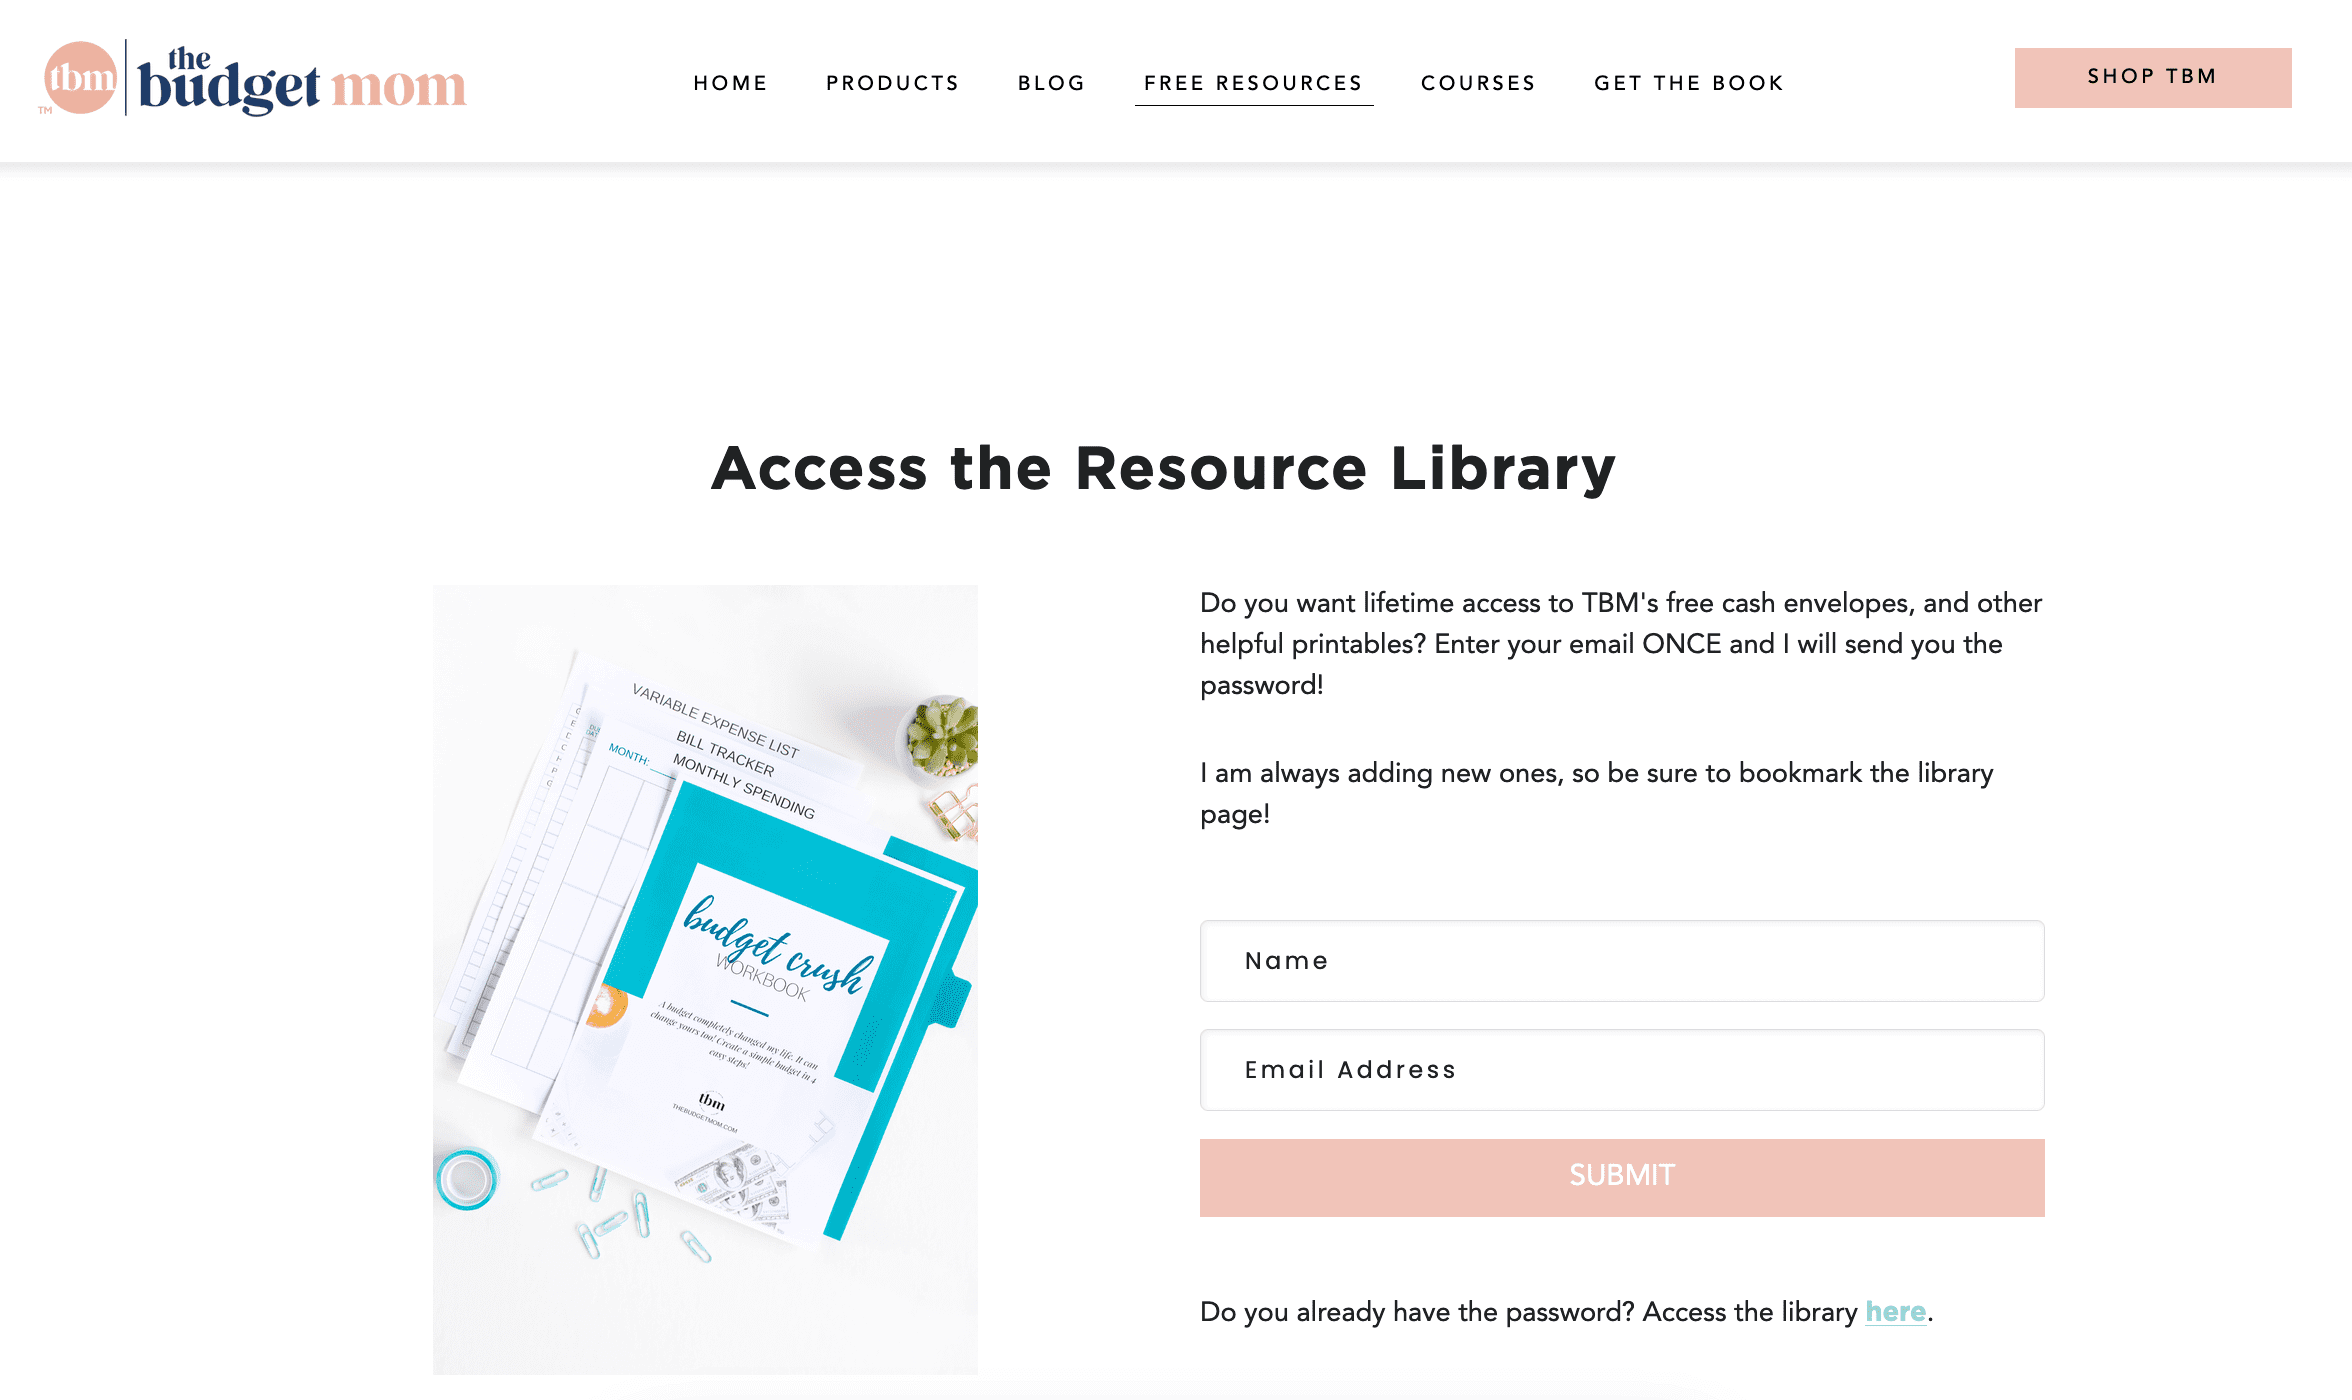 A resource library lead magnet